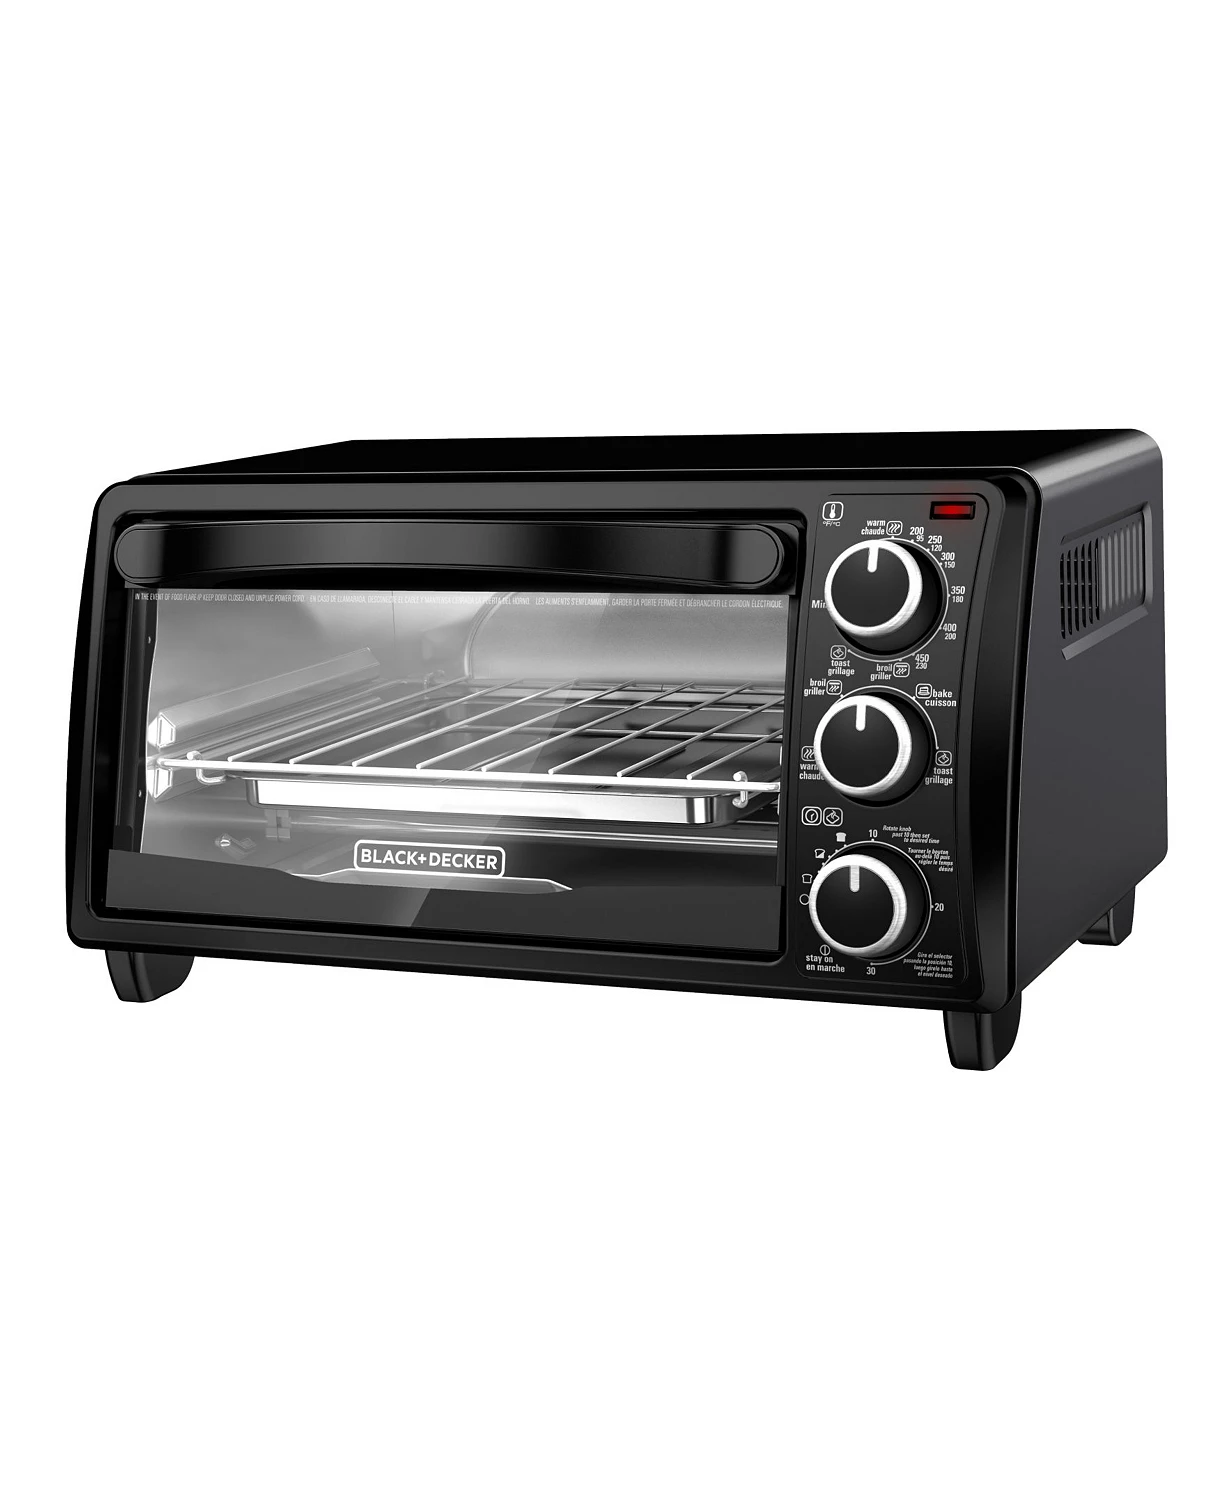 Macy’s: The Black & Decker 4-Slice Toaster Oven is on sale for $24.43